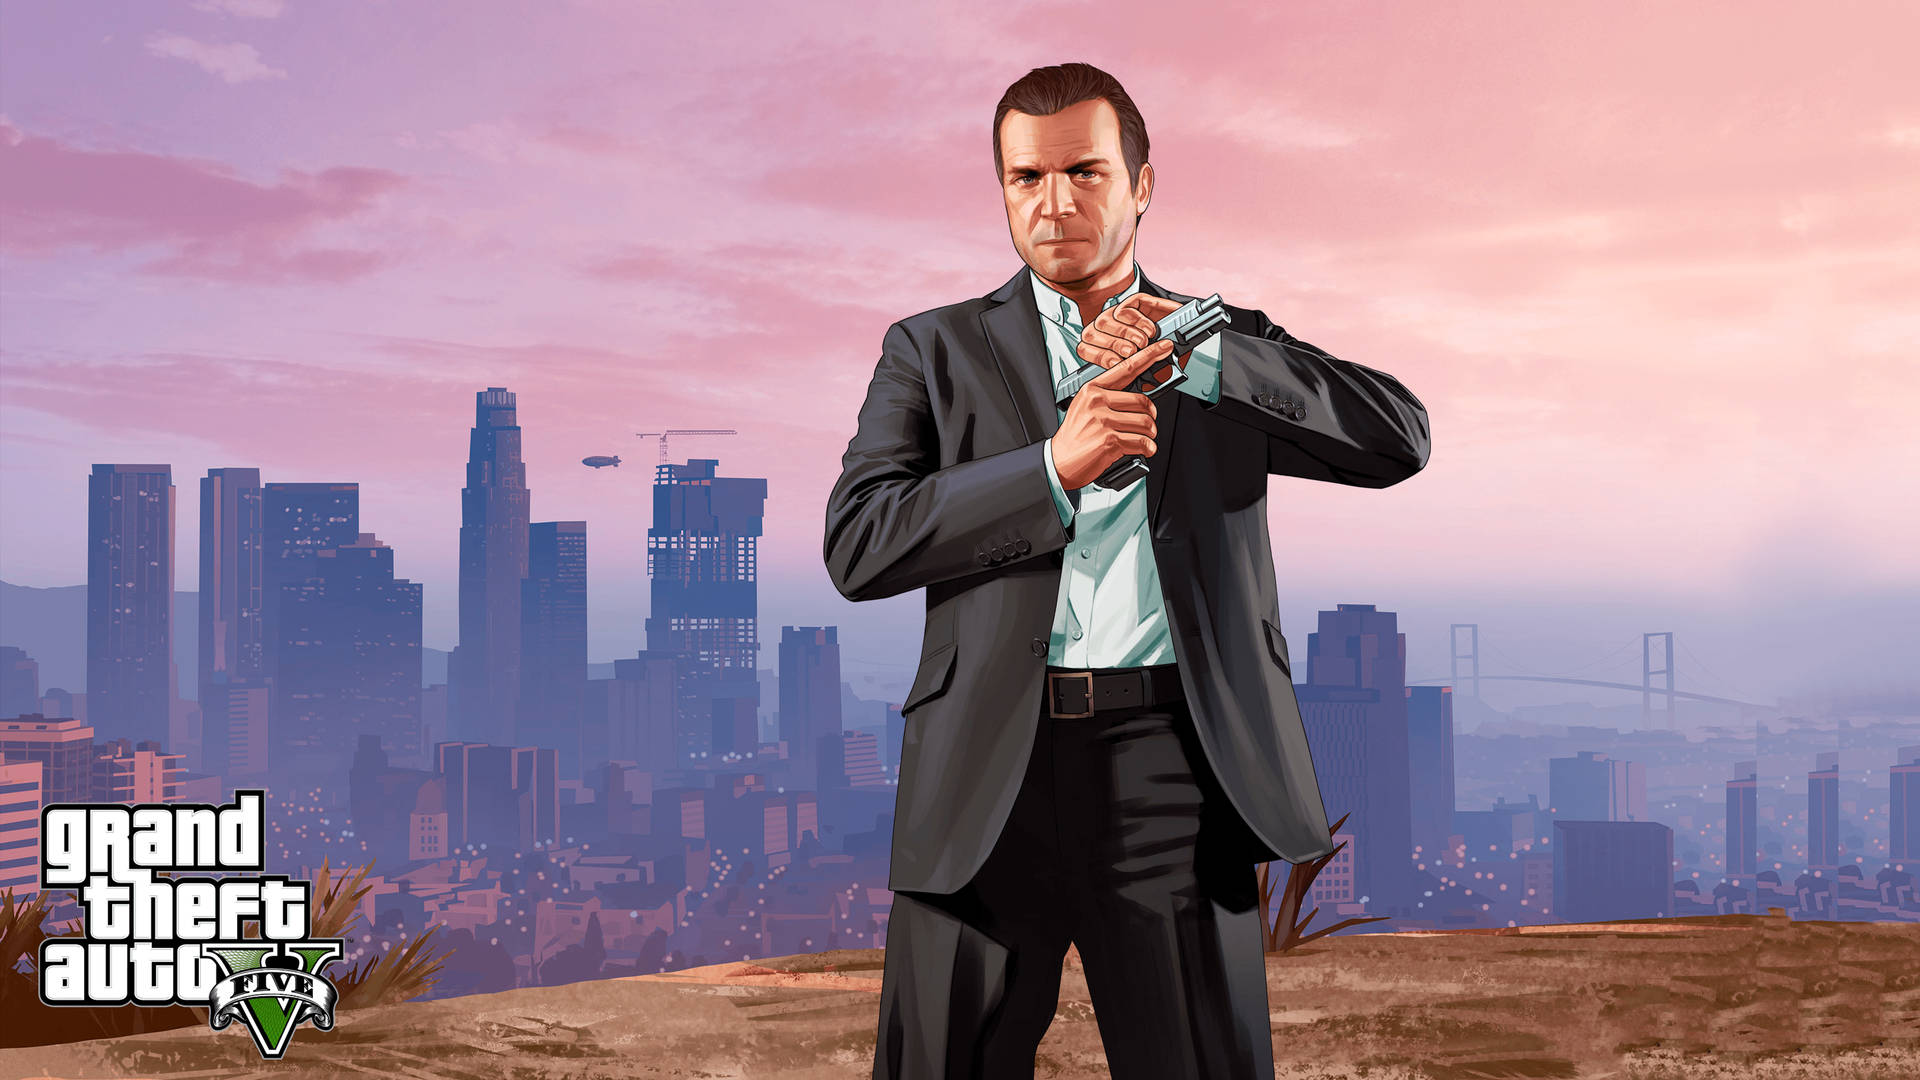 Grand Theft Auto 5 on iPhone Wallpaper